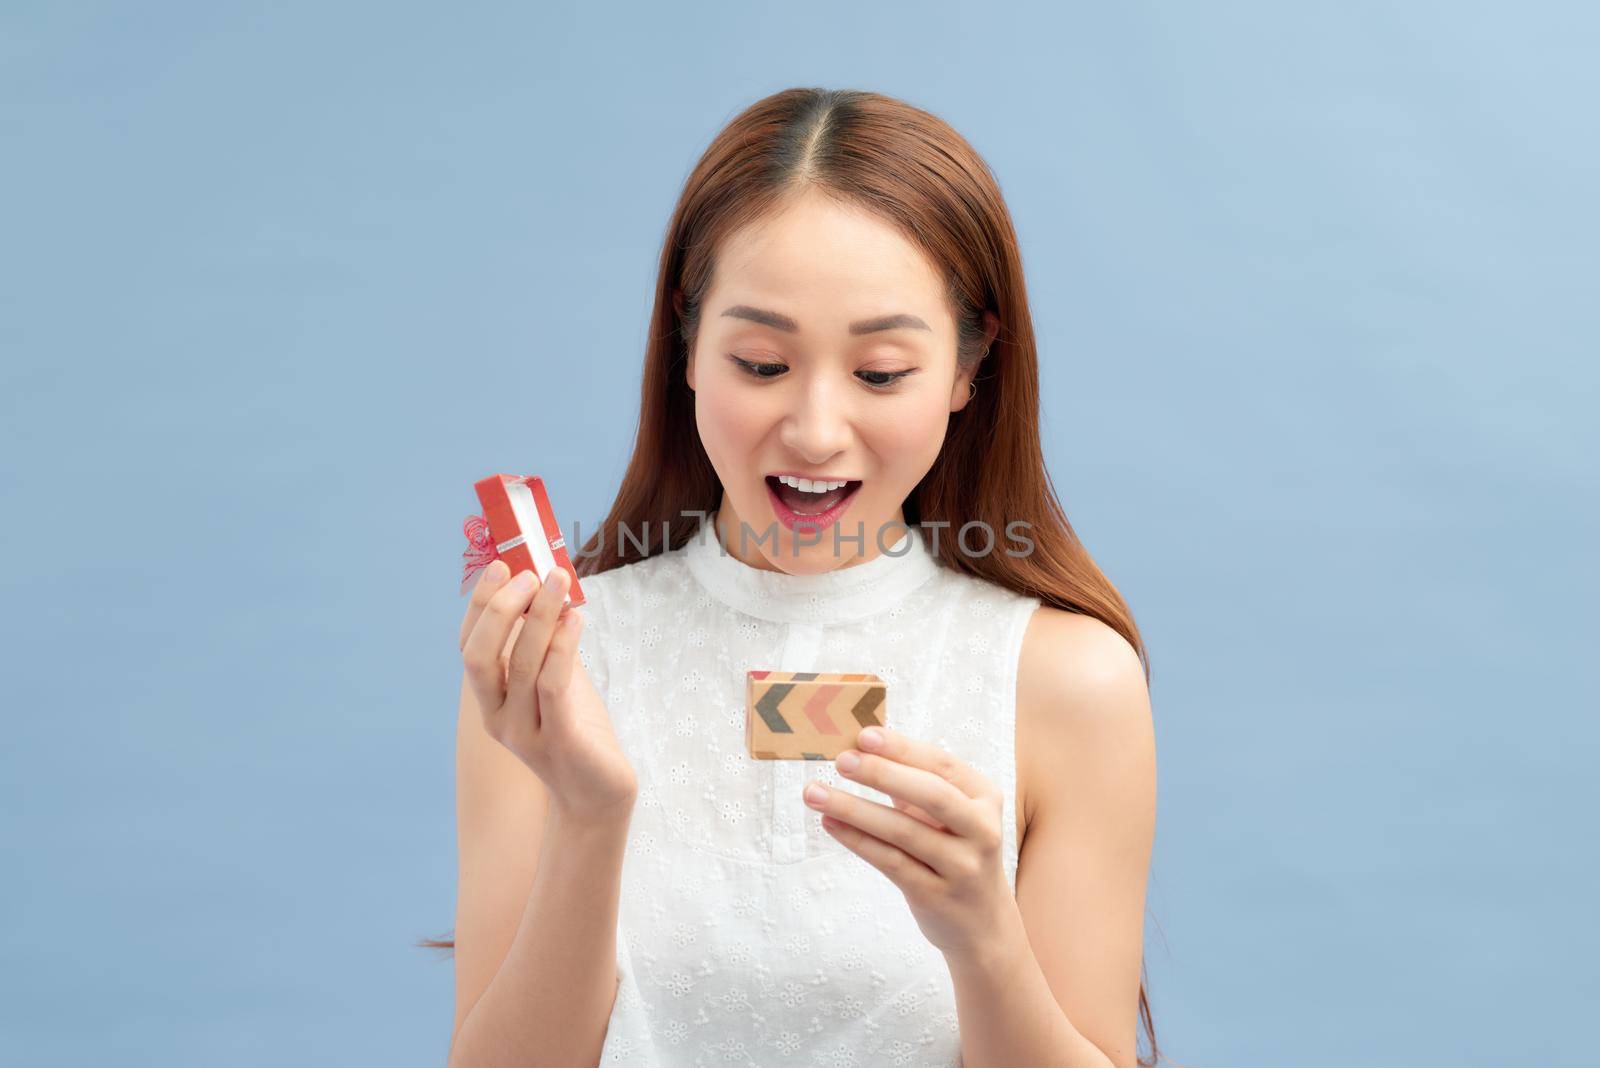 Cheerful young woman holding small gift box isolated on a blue background